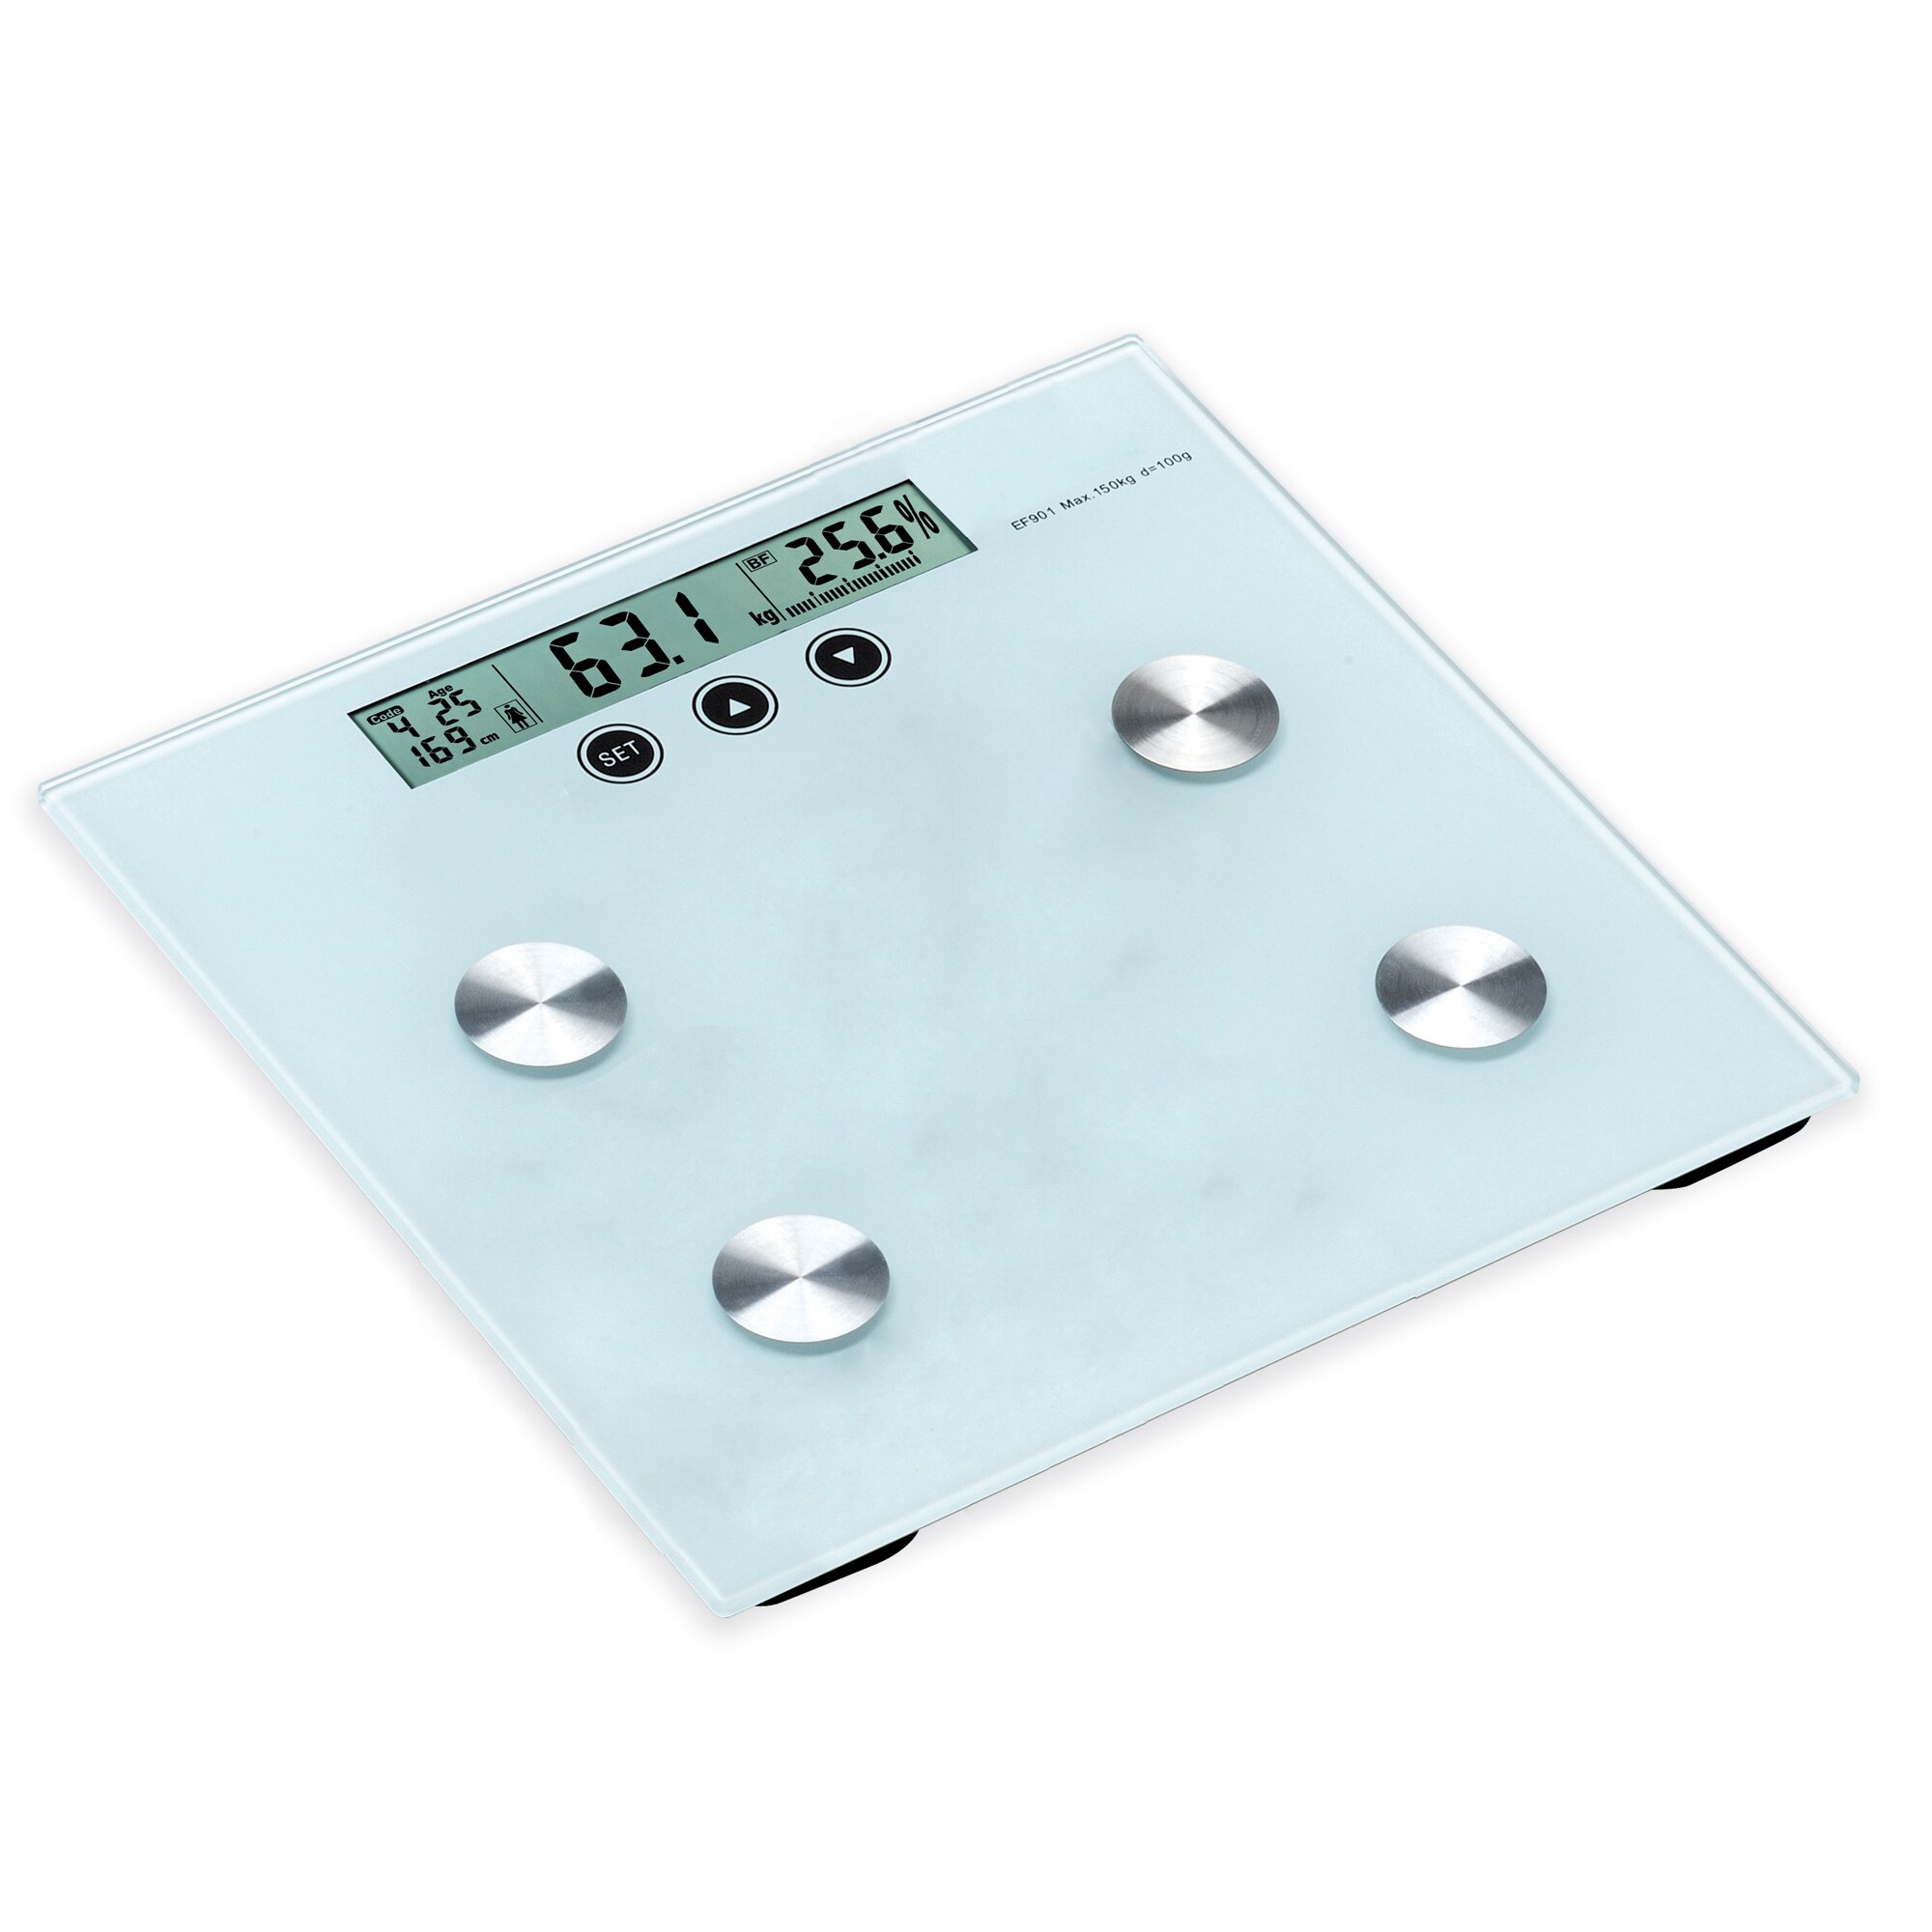 Weight Management Buy Weight Scales, Weight Loss